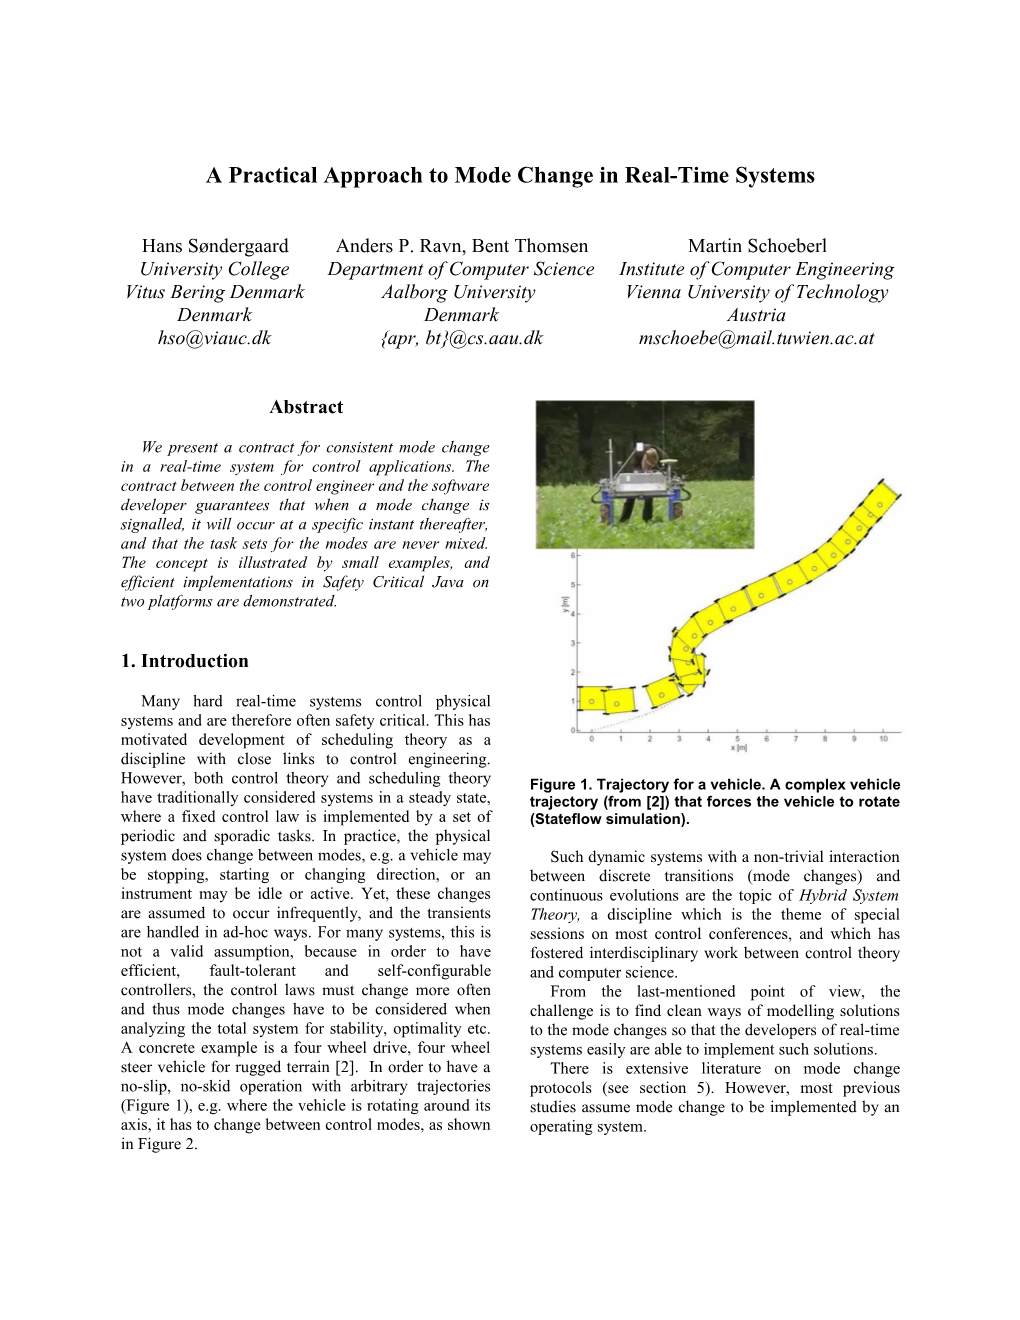 A Practical Approach to Mode Change in Real-Time Systems